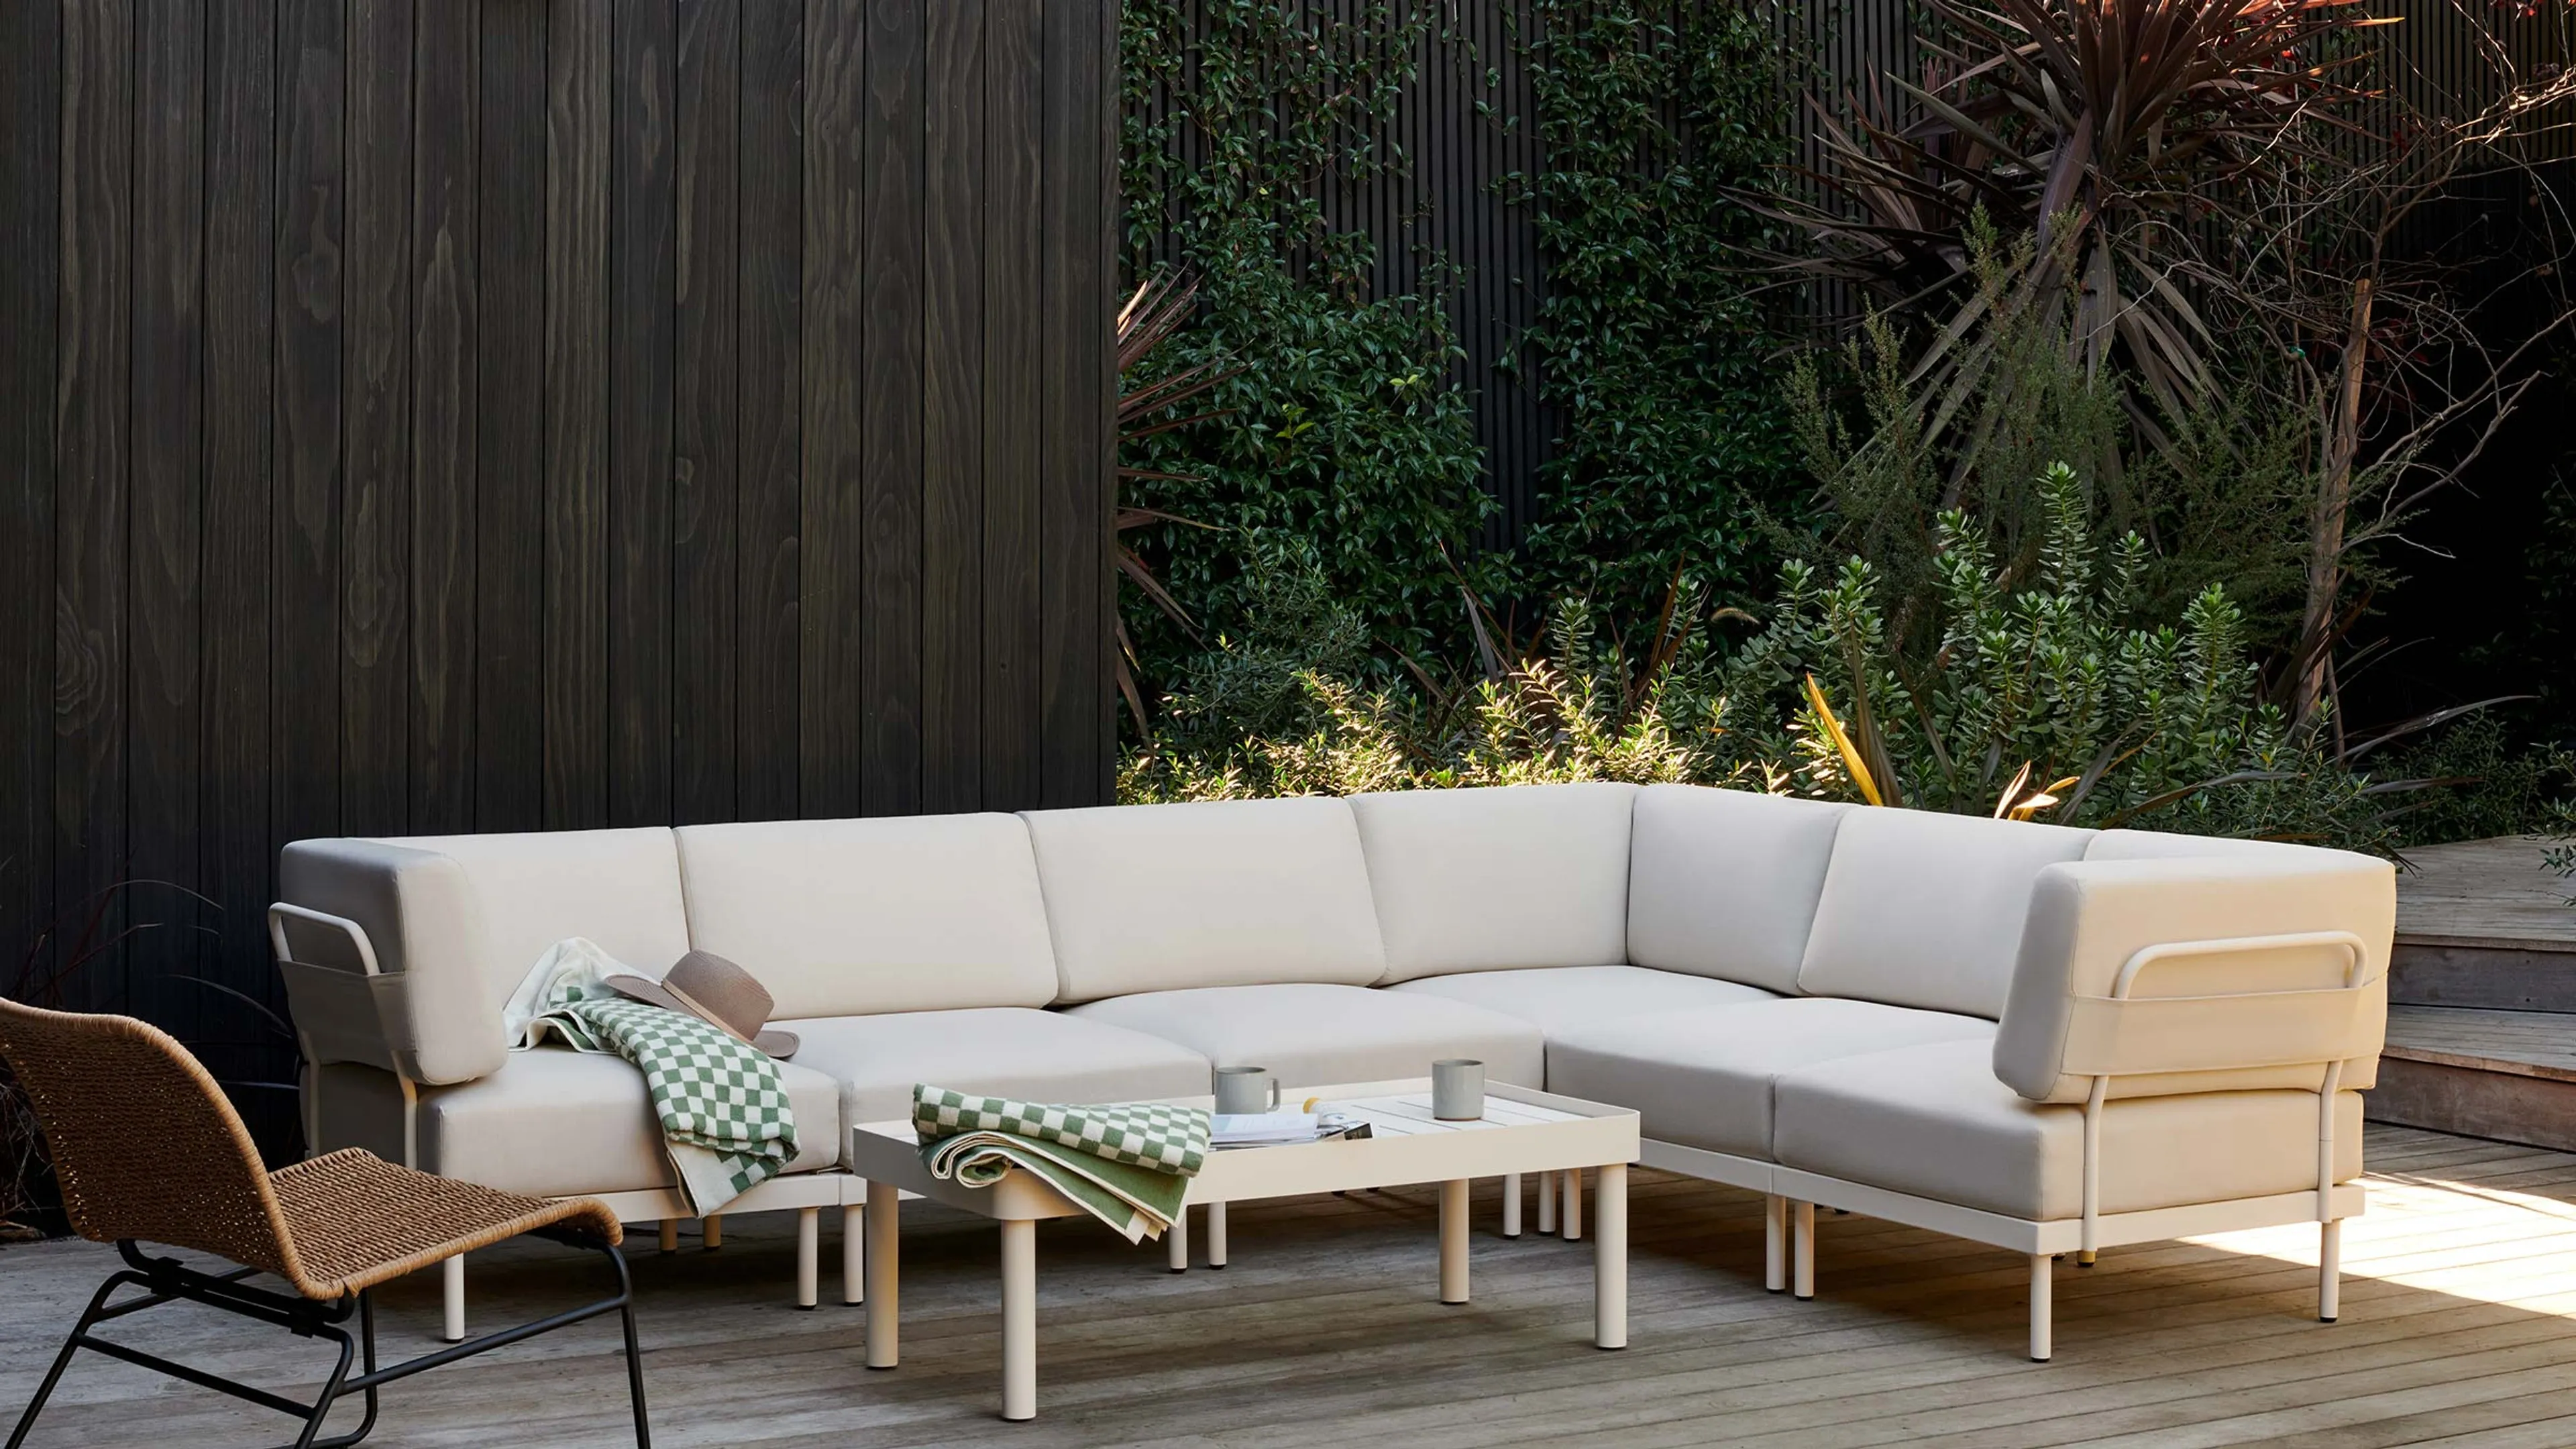 Relay Outdoor 4-Piece Armless Sectional